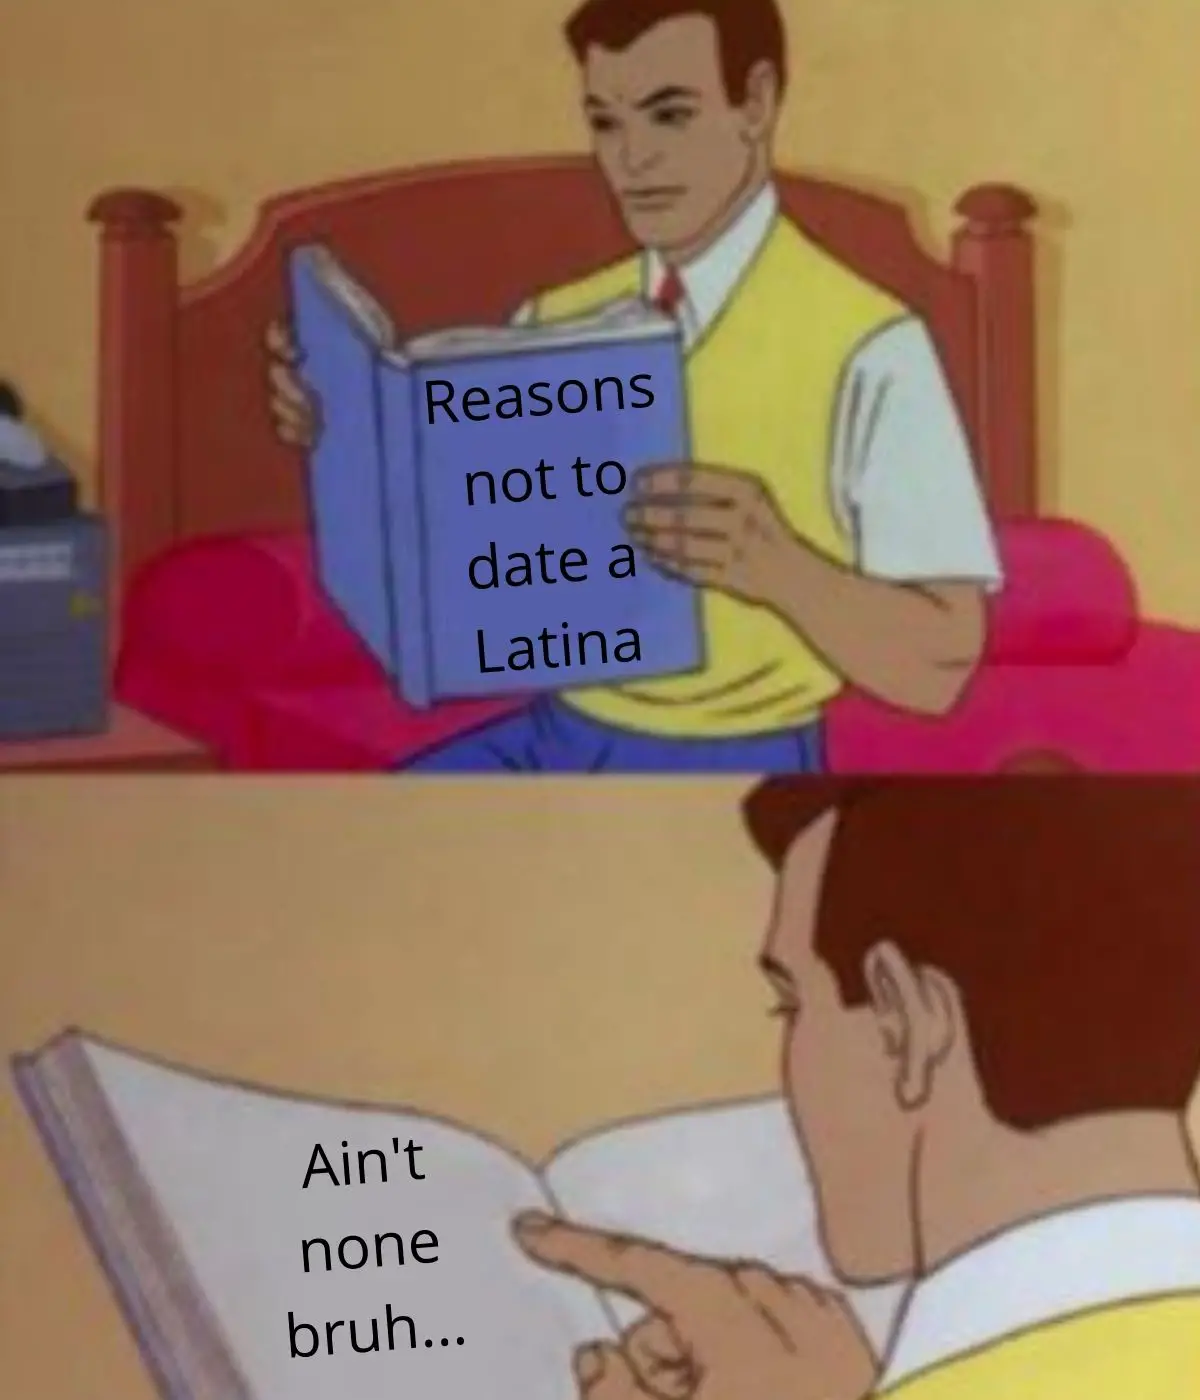 Reasons not to date a latina meme on guy reading book